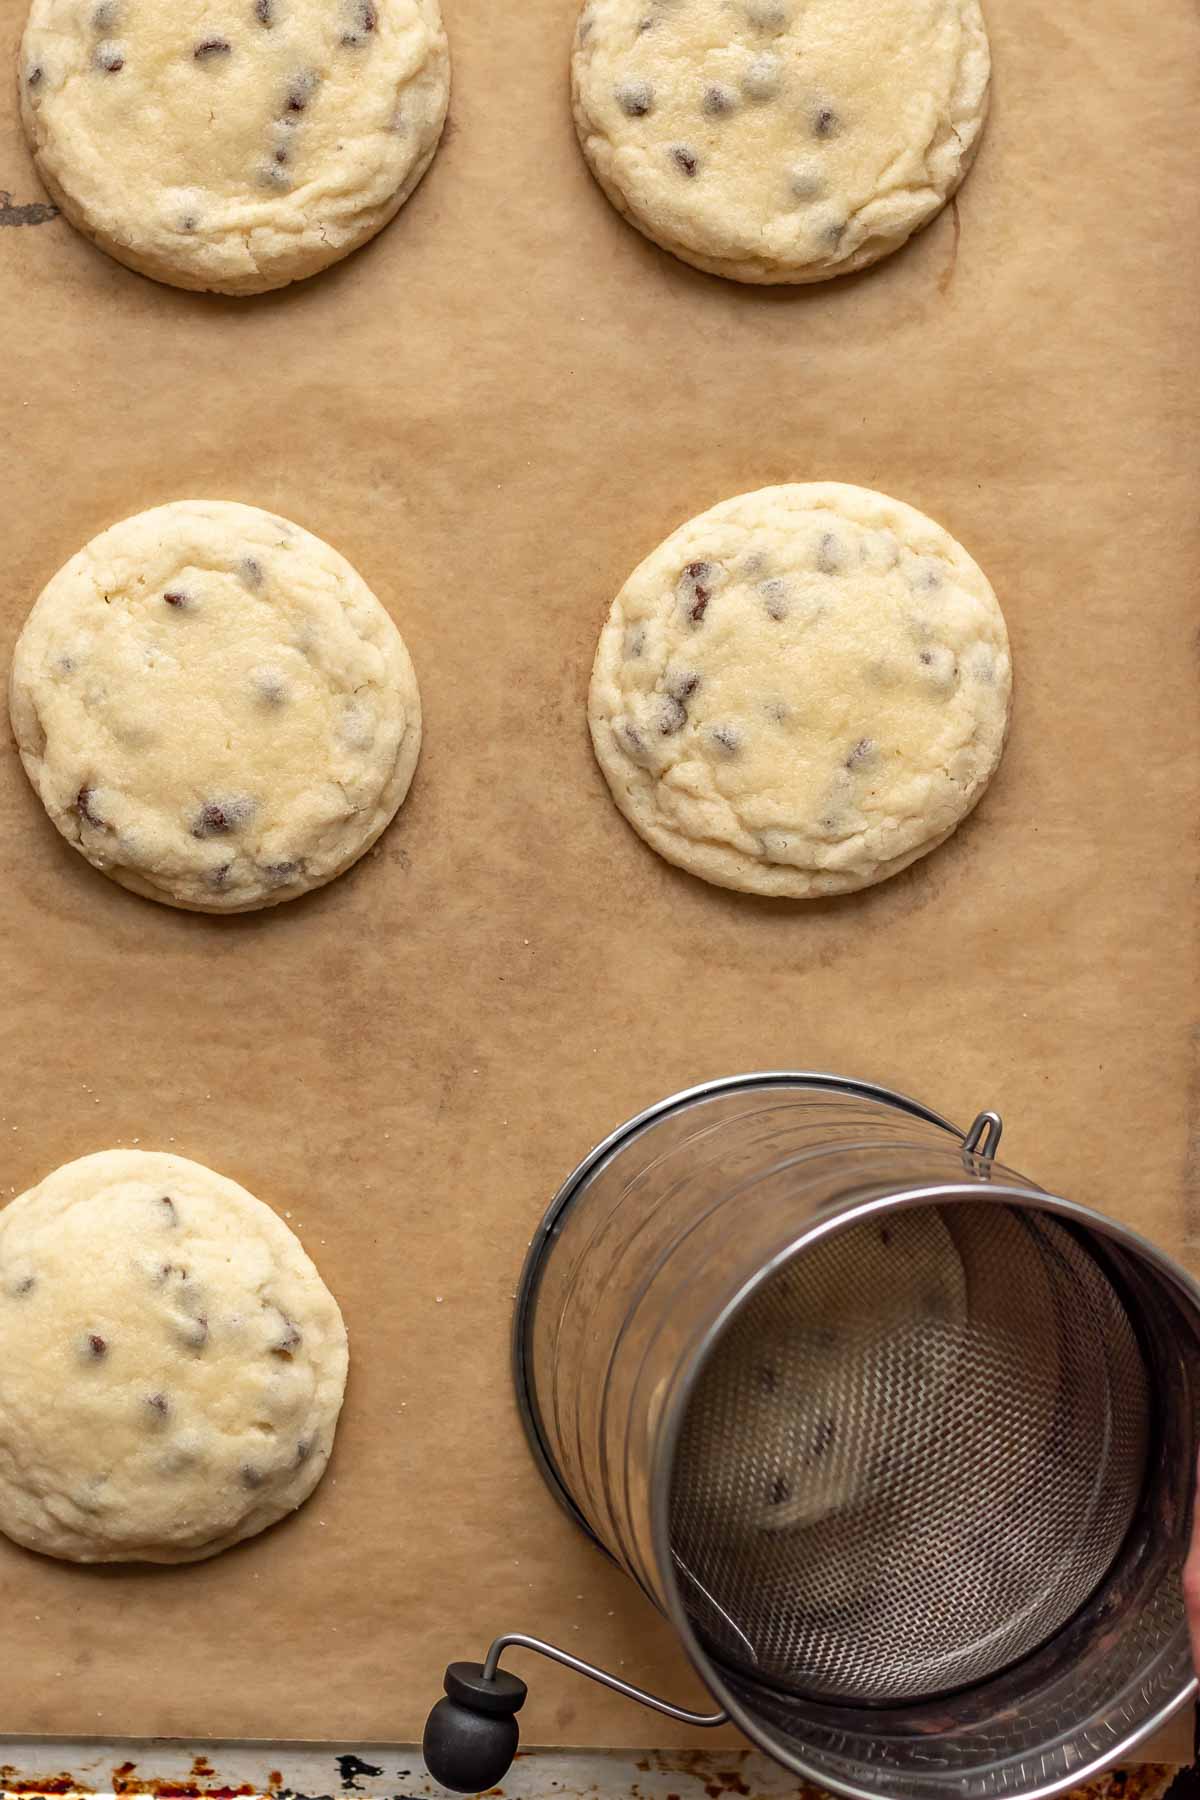 A round object goes around one of the baked cookies to make it perfectly round.